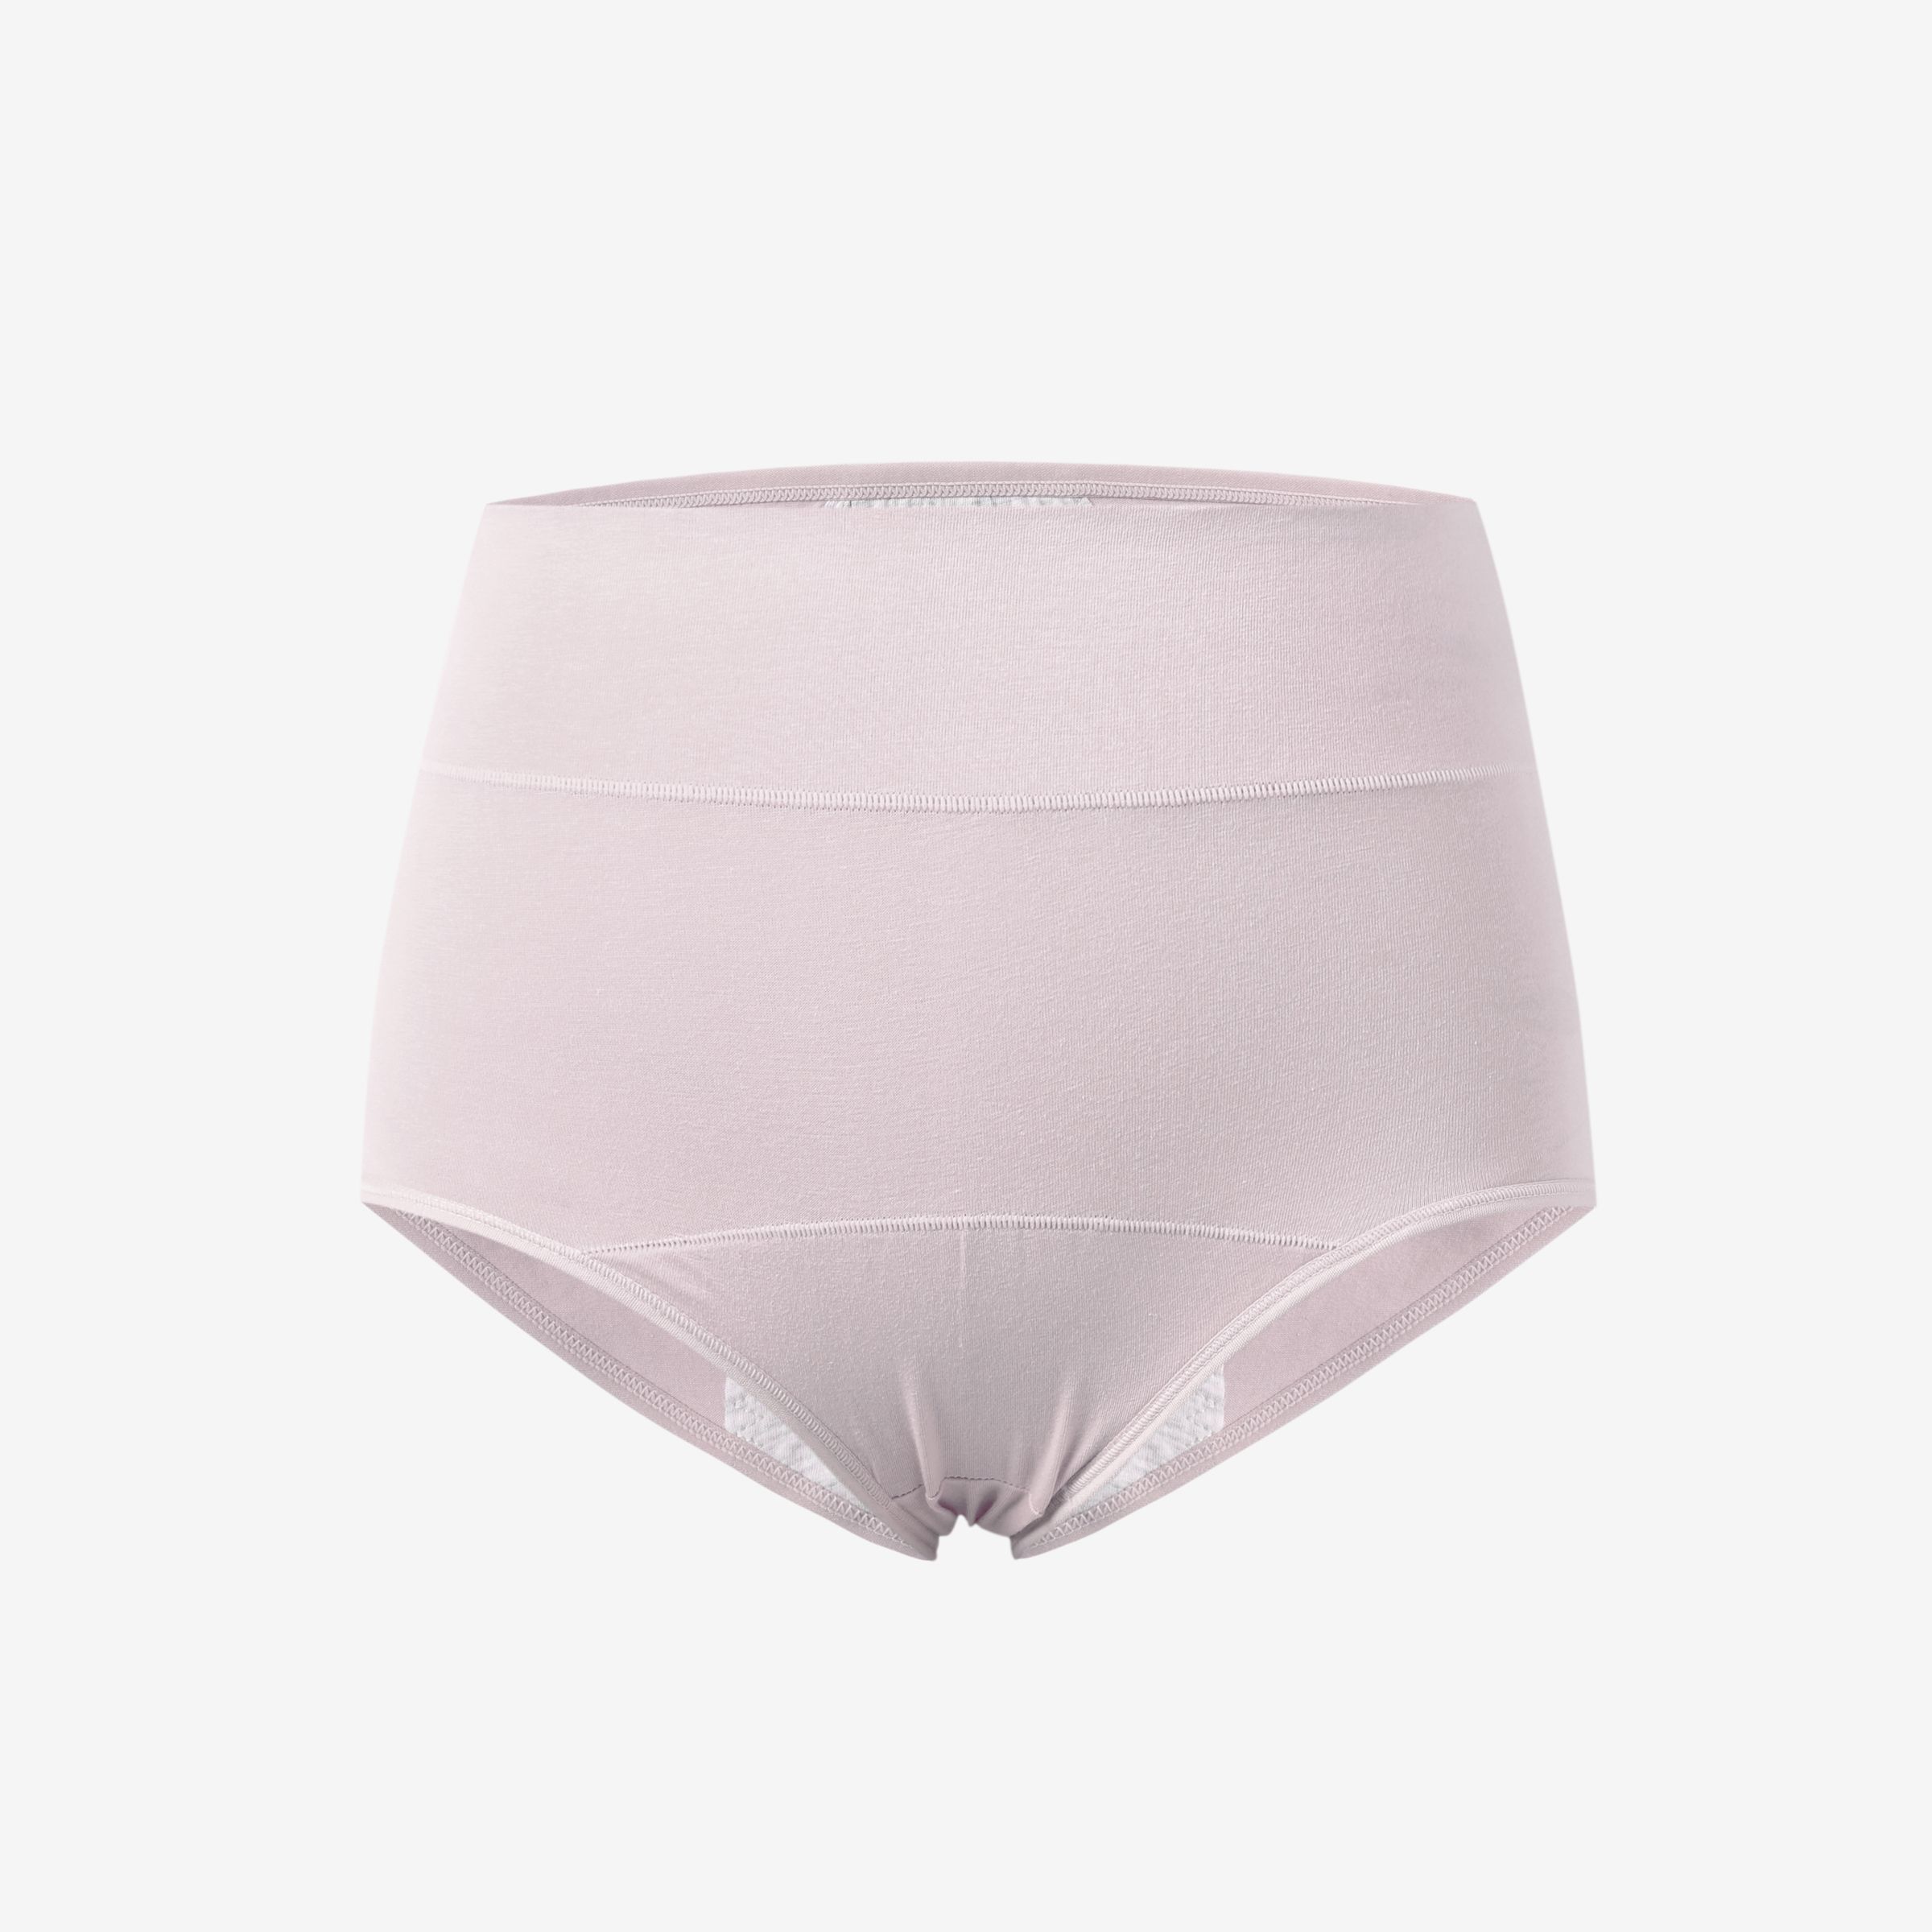 Women's Cotton Physiological Underwear - Solid Color, Leak-Proof